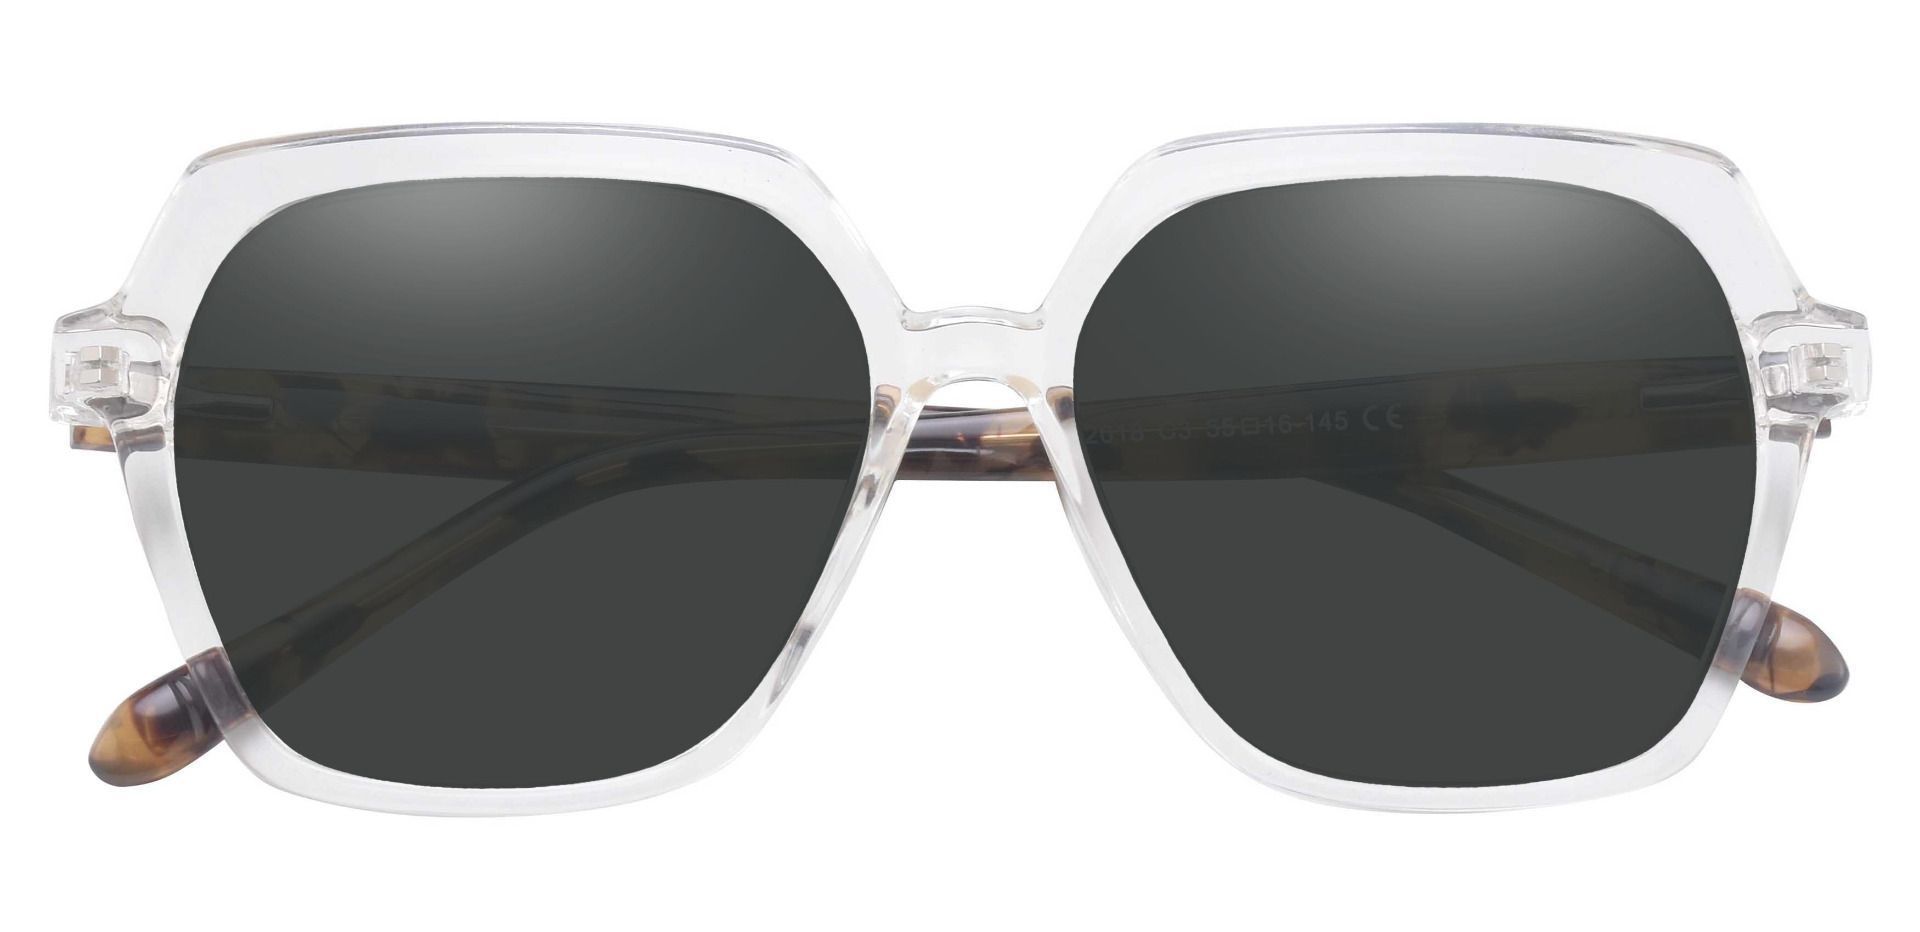 Regent Geometric Reading Sunglasses - Clear Frame With Gray Lenses